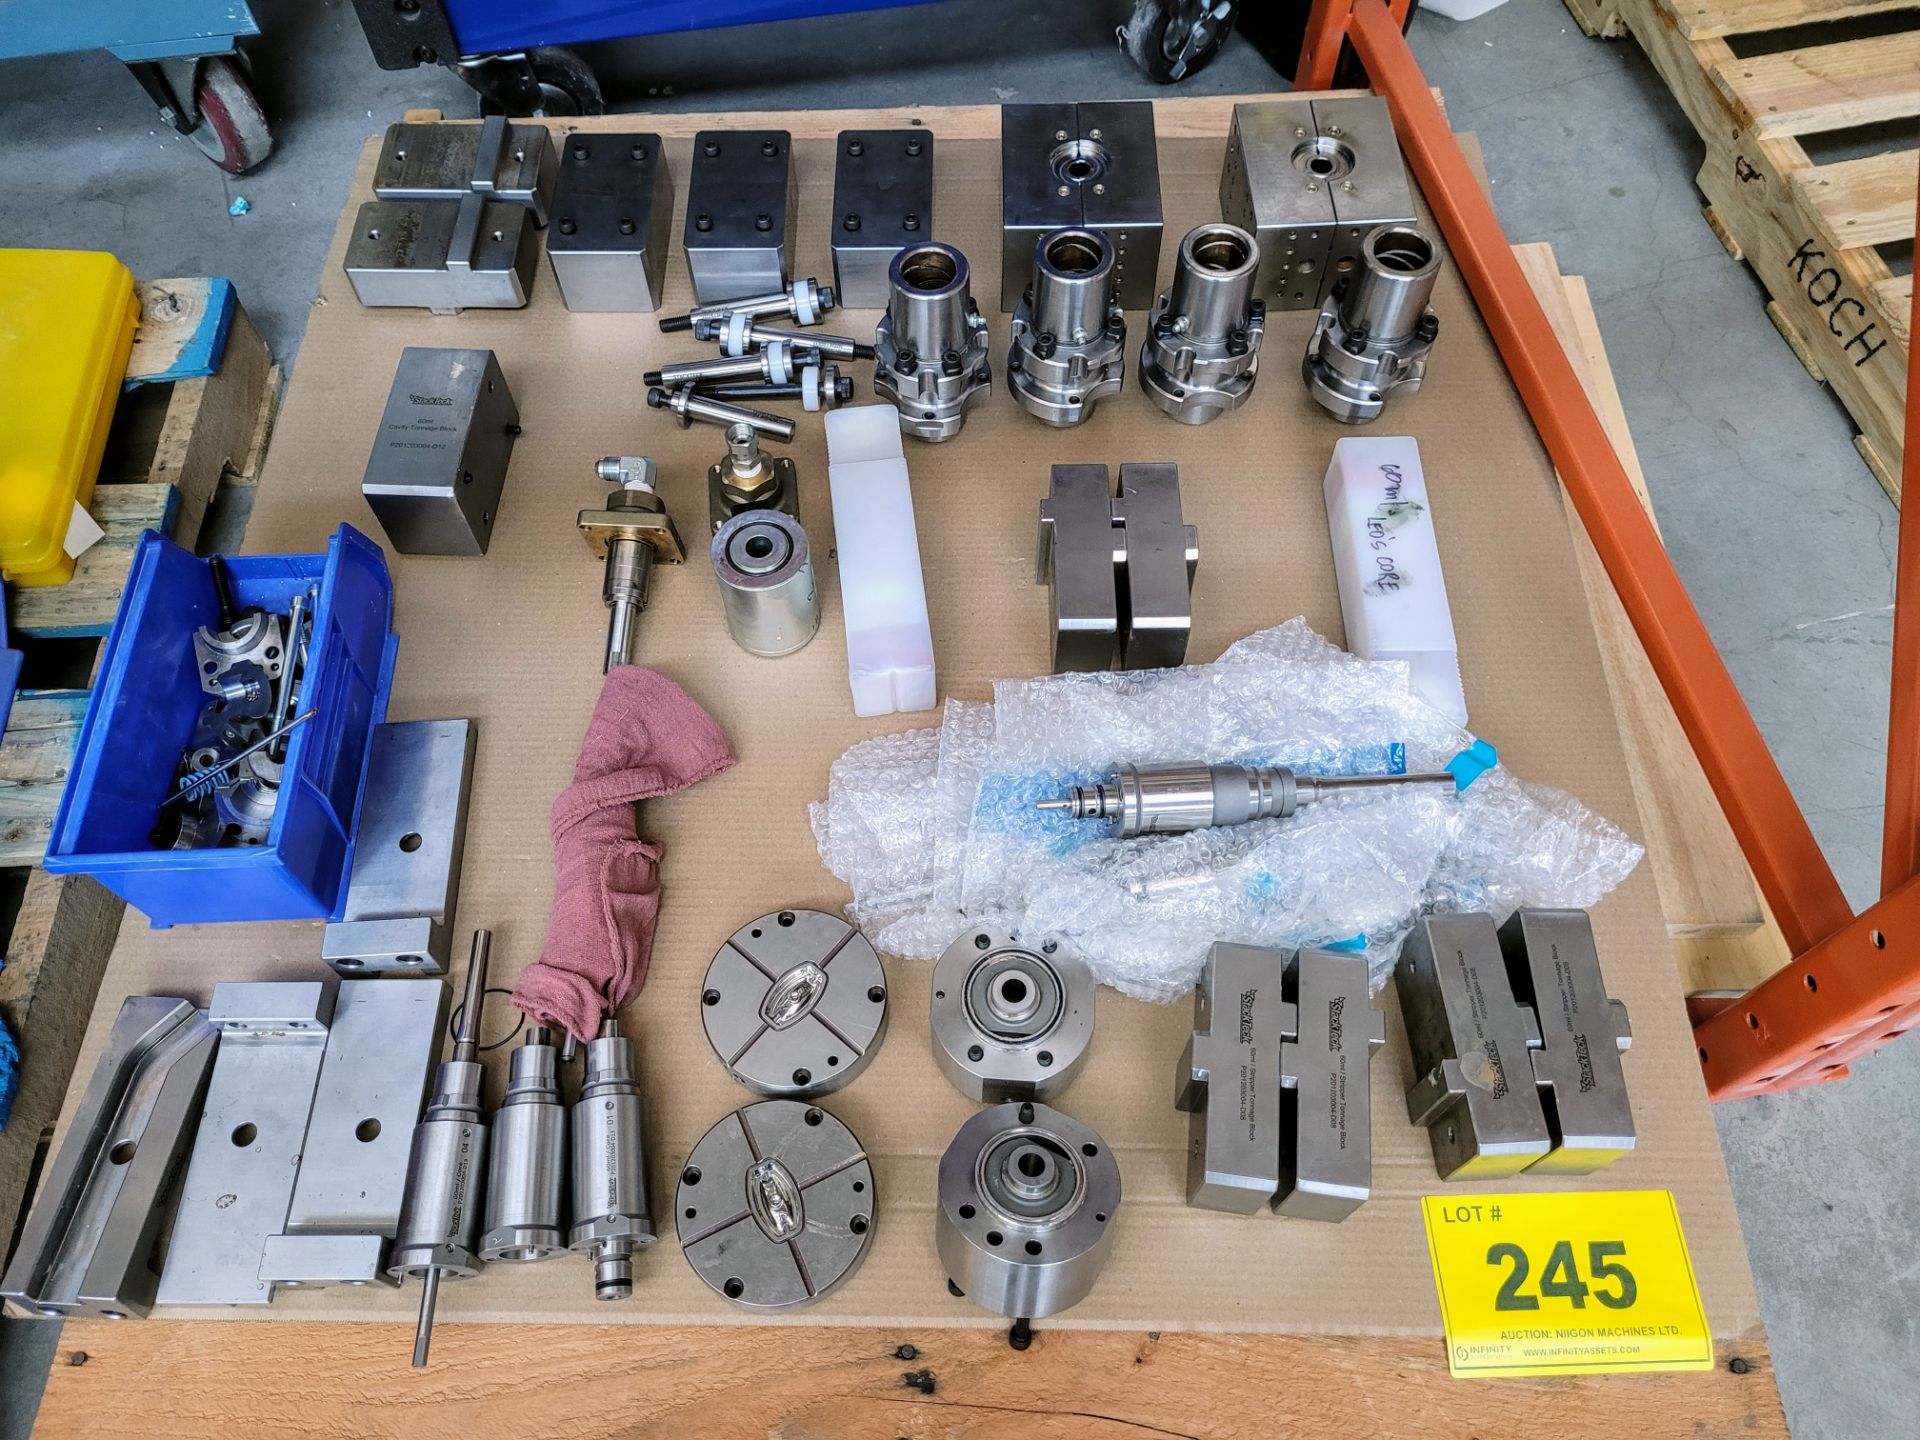 LOT - CAVITY TONNAGE BLOCKS, BOLTS, STRIPPER TONNAGE BLOACKS, ETC. (LOCATED IN BUILDING 372)